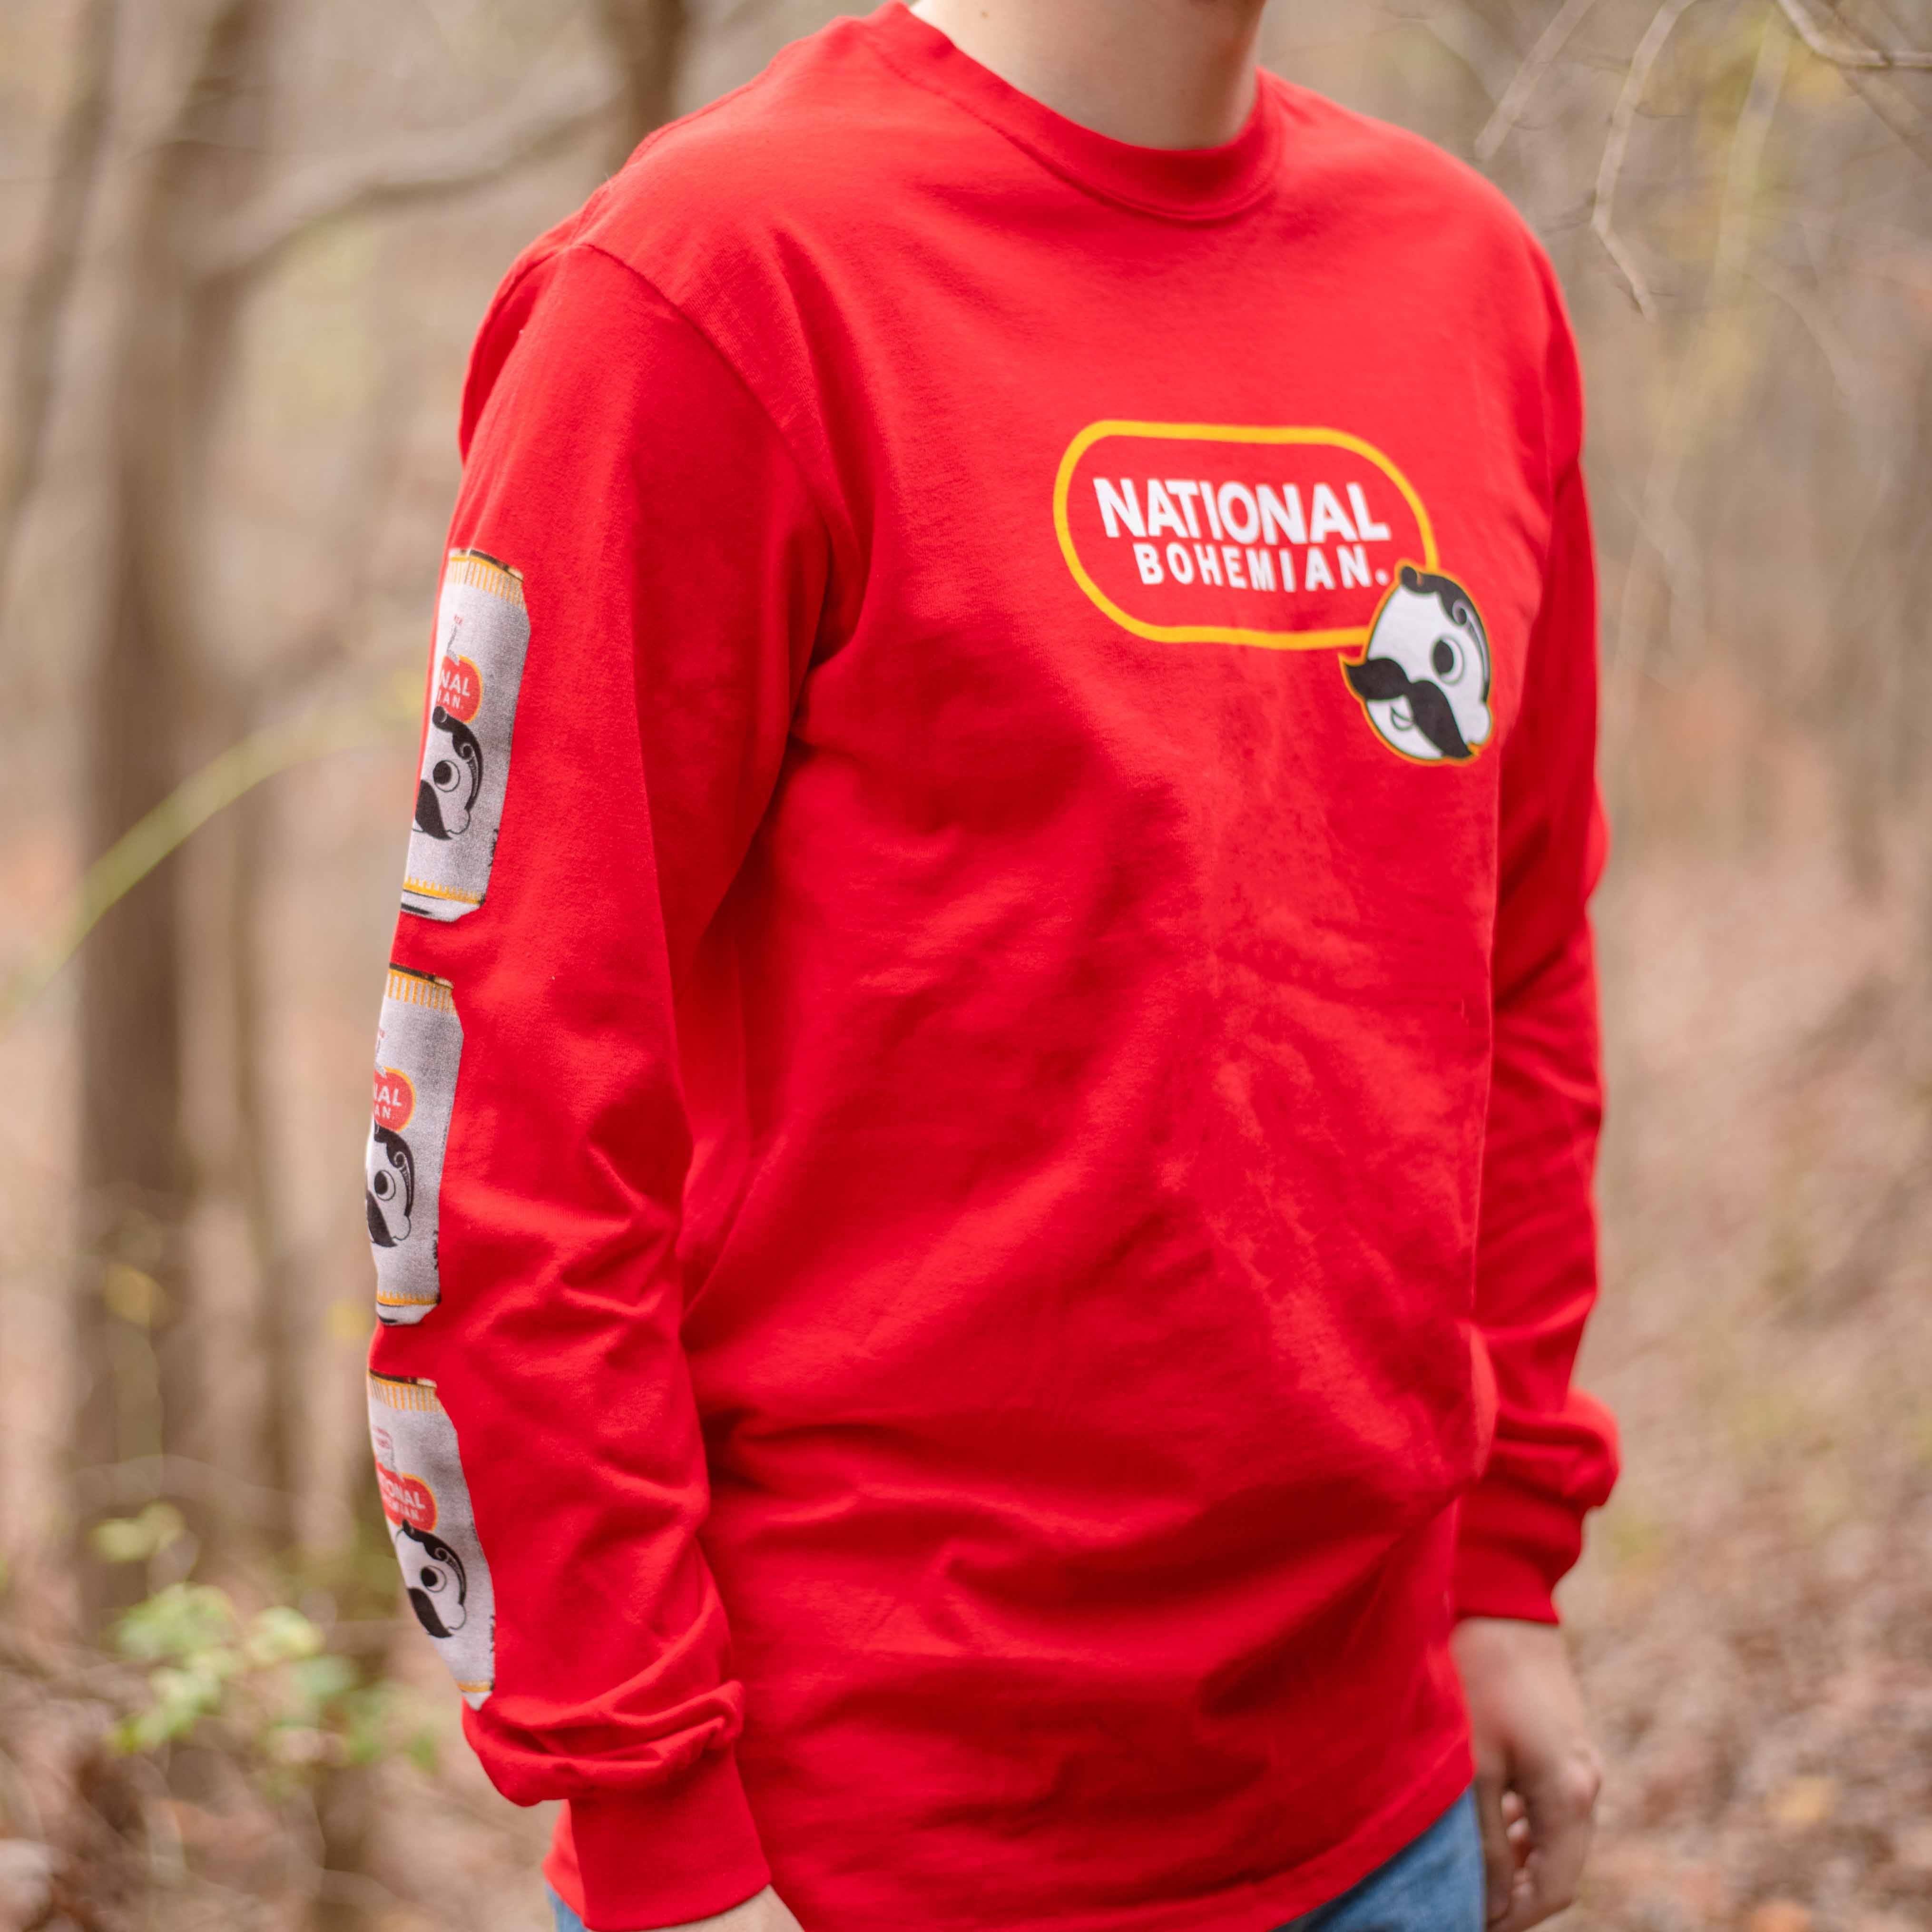 National Bohemian - Live Pleasantly Signature Can Sleeve (Red) / Long Sleeve Shirt - Route One Apparel